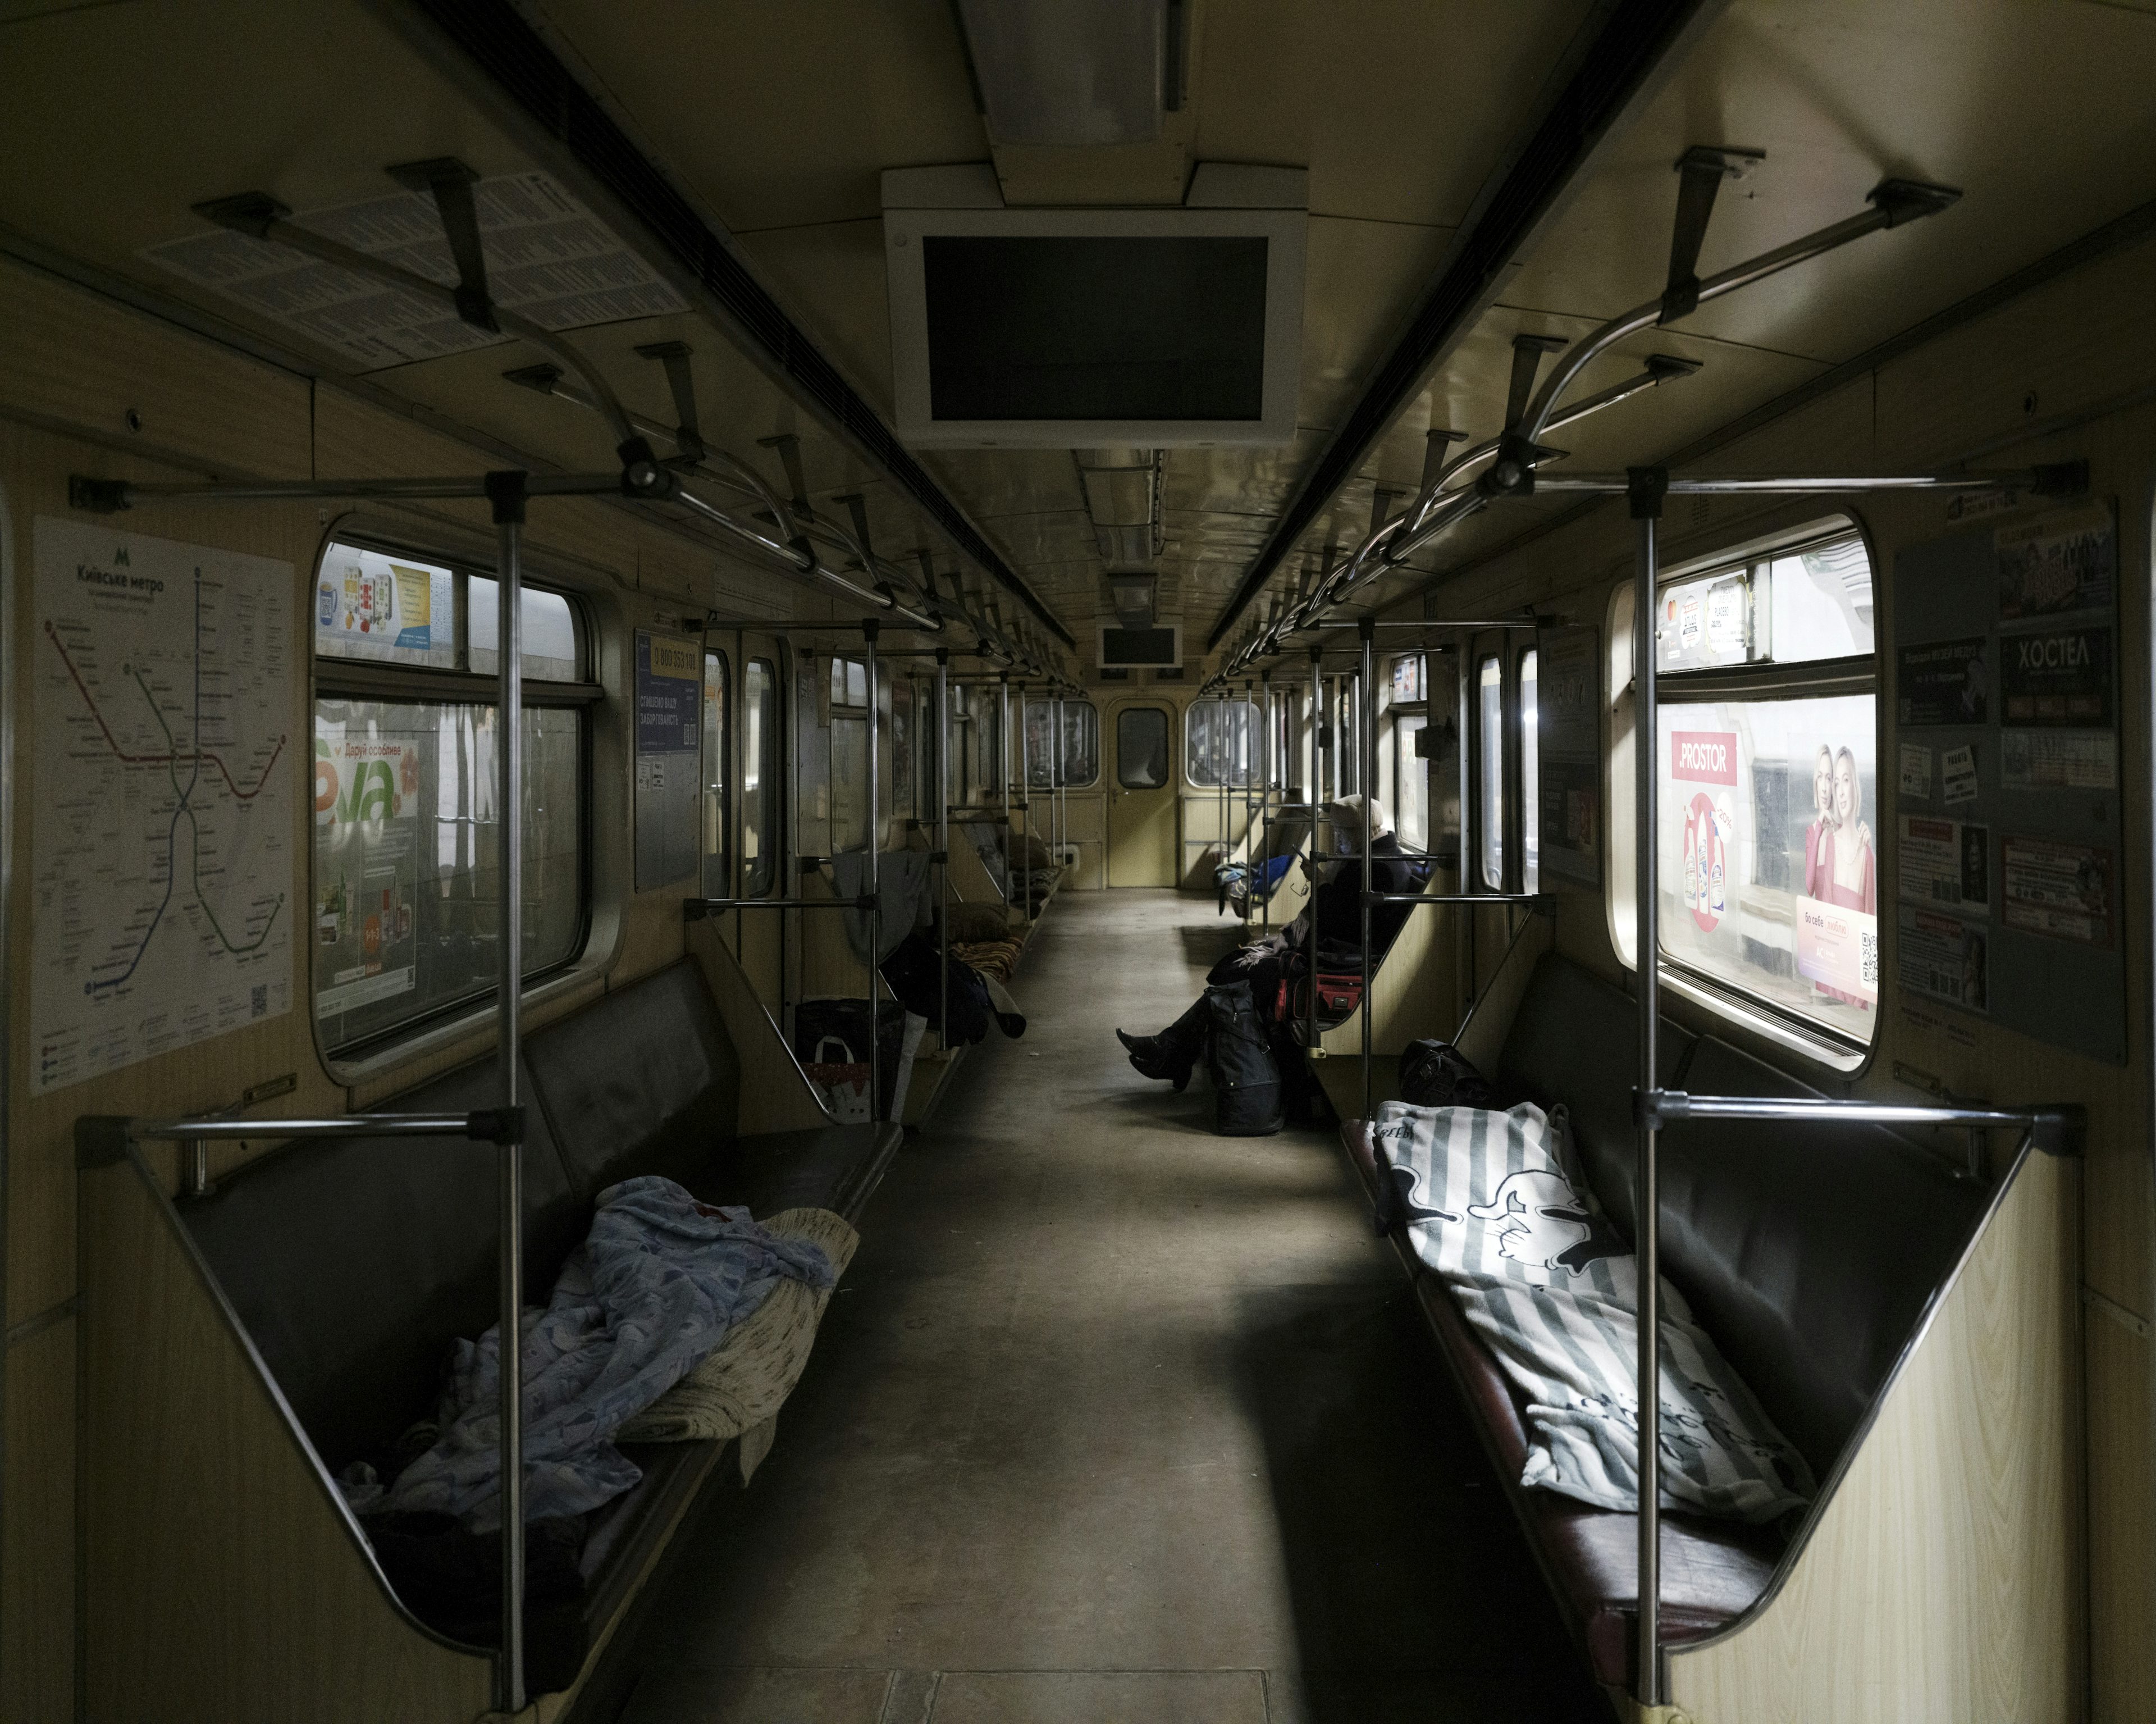 UKRAINE. Kyiv. 4 March 2022. A metro car used as a dormitory to shelter from the artillery strikes that hit the city' especially at night. Photo by Lorenzo Meloni